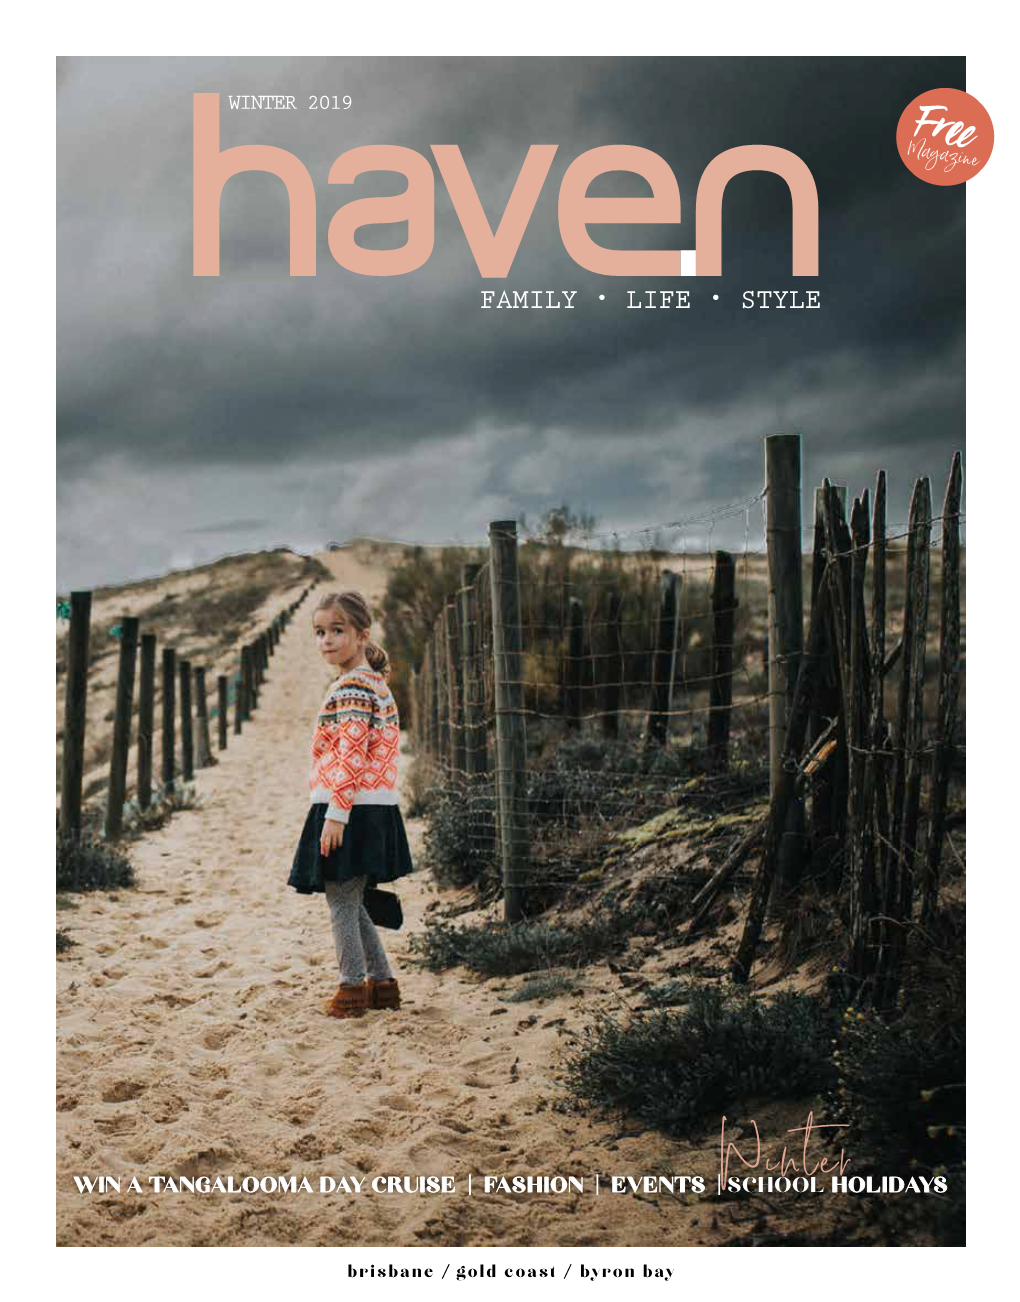 Latest Issue and Make Sure You Keep Clicking with Haven Socially and Digitally Each Week (You Can Sign up for Our Weekly Haven Ehub Newsletter for Free!)